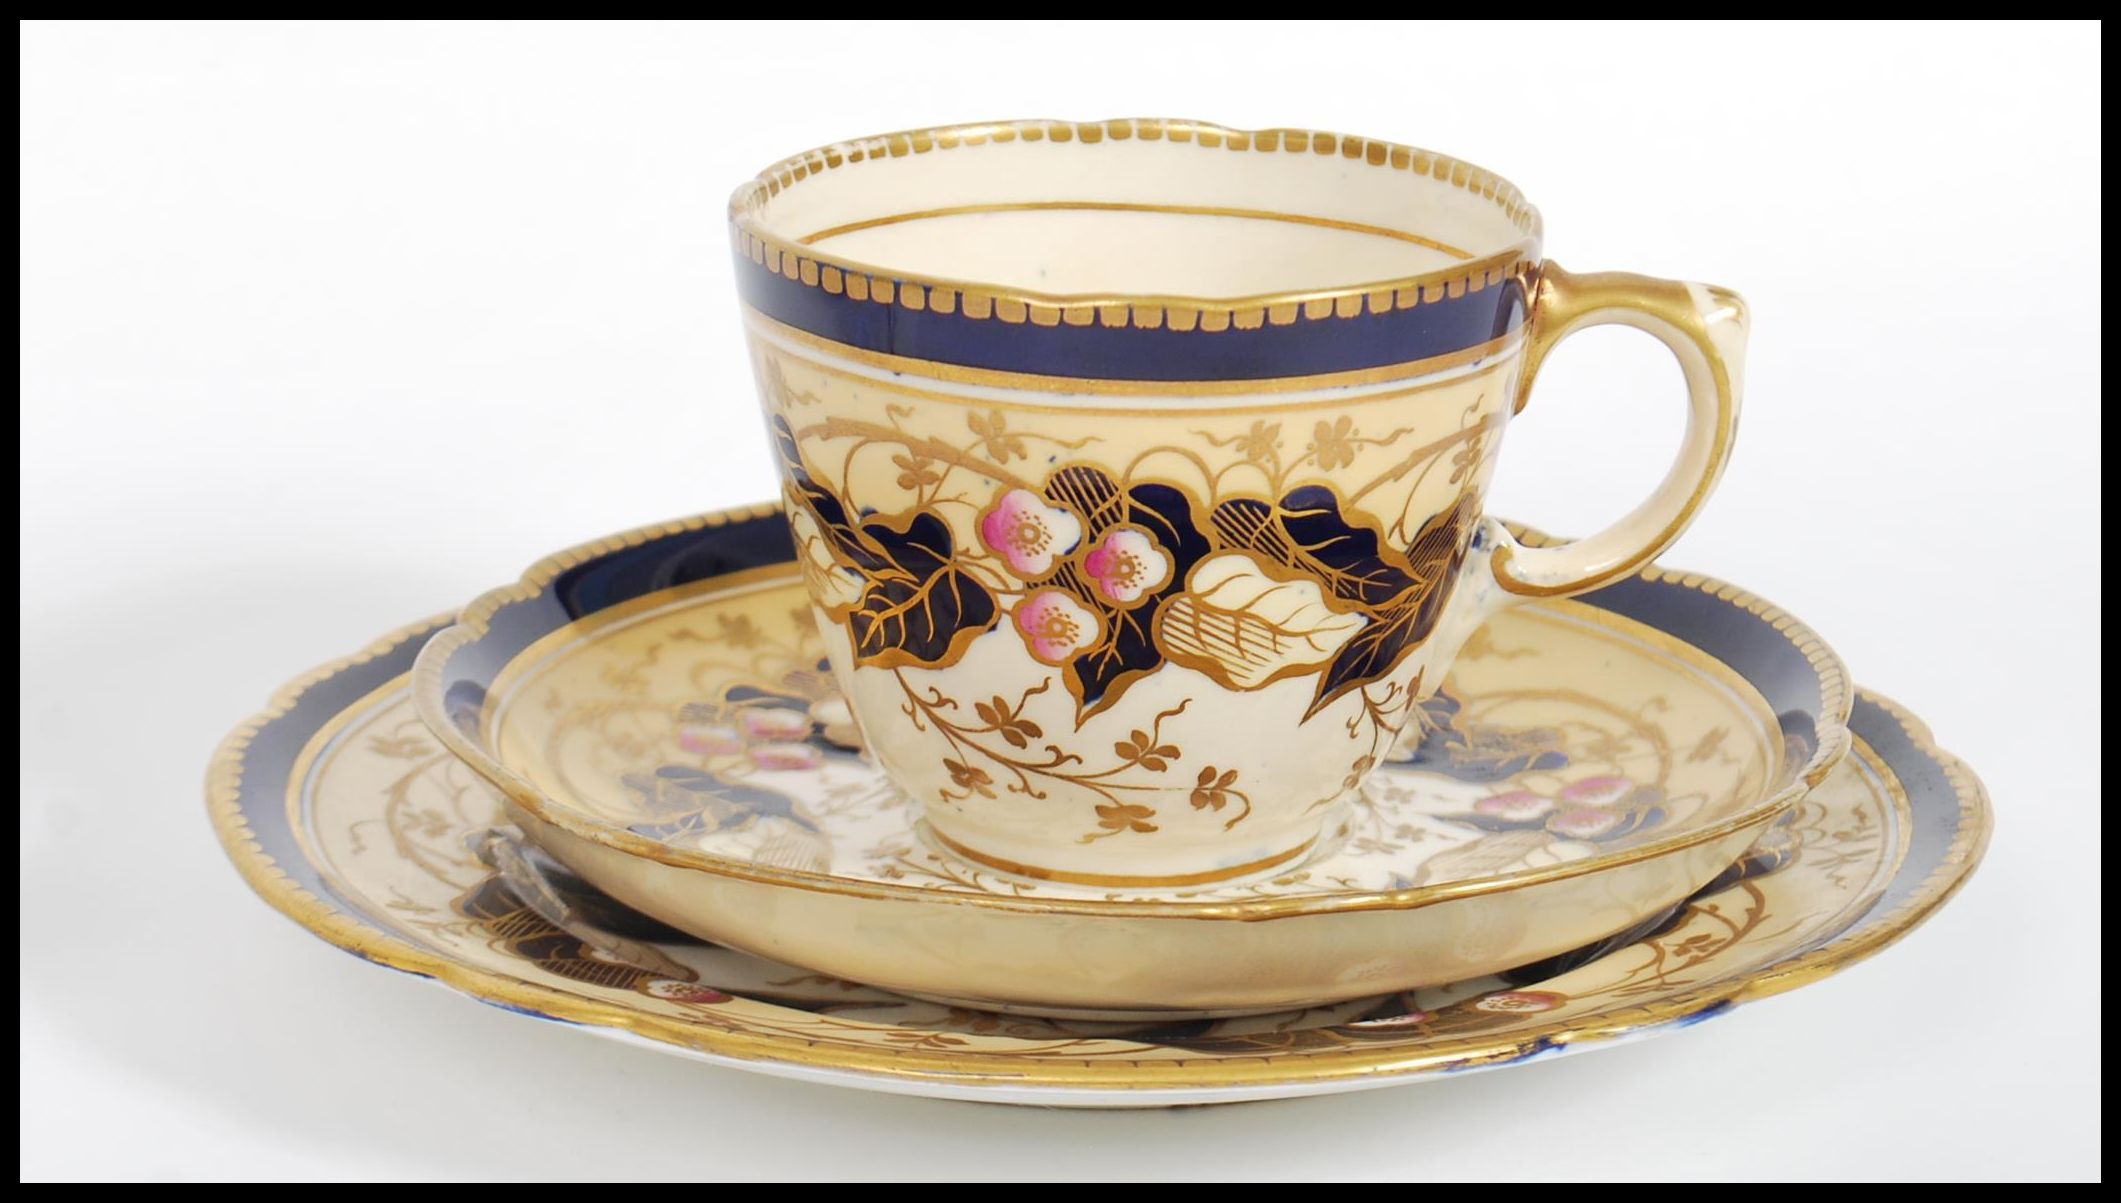 A 19th century Victorian Worcester cup saucer, lidded sugar bowl and creamer milk jug in a - Image 3 of 7